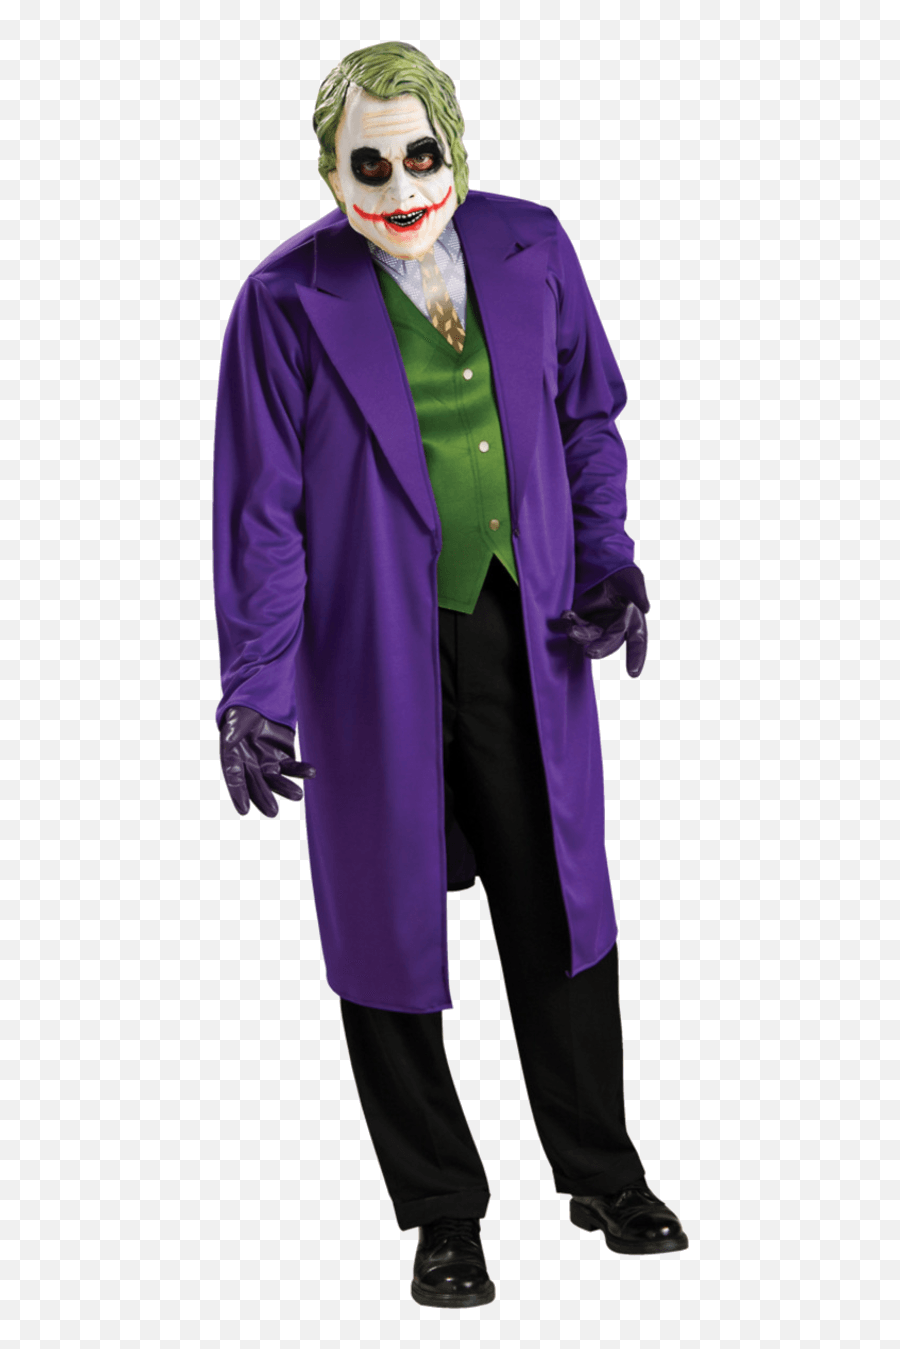 Joker Png Image Without Background Web Icons Smile